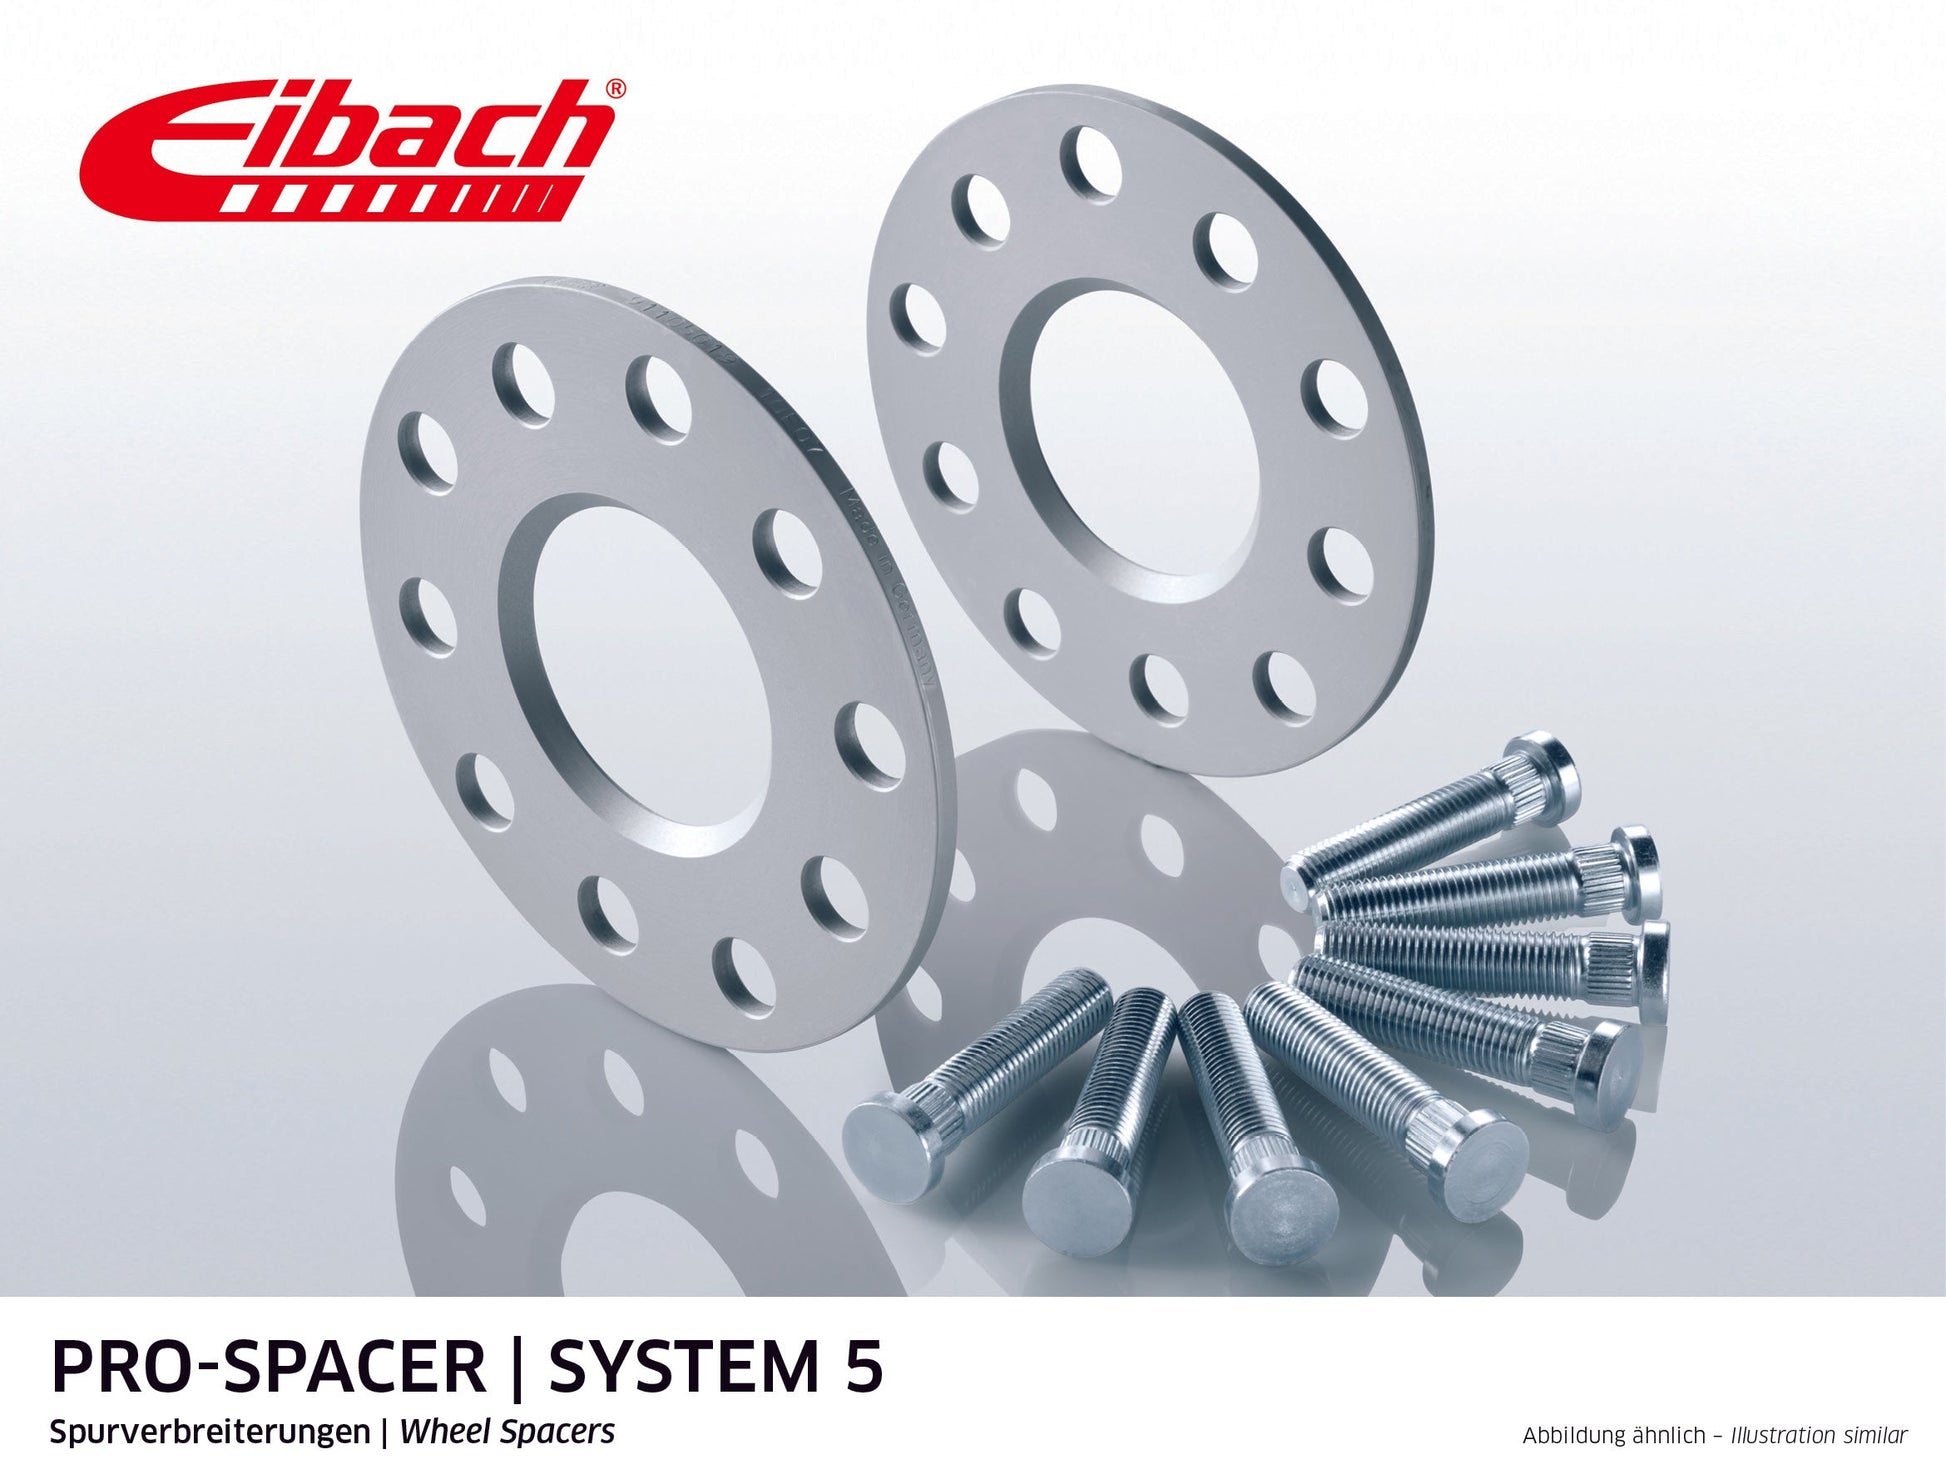 Eibach Pro-Spacer Kit (Pair Of Spacers) 5mm Per Spacer (System 5) S90-5-05-032 (Silver) at £76.29